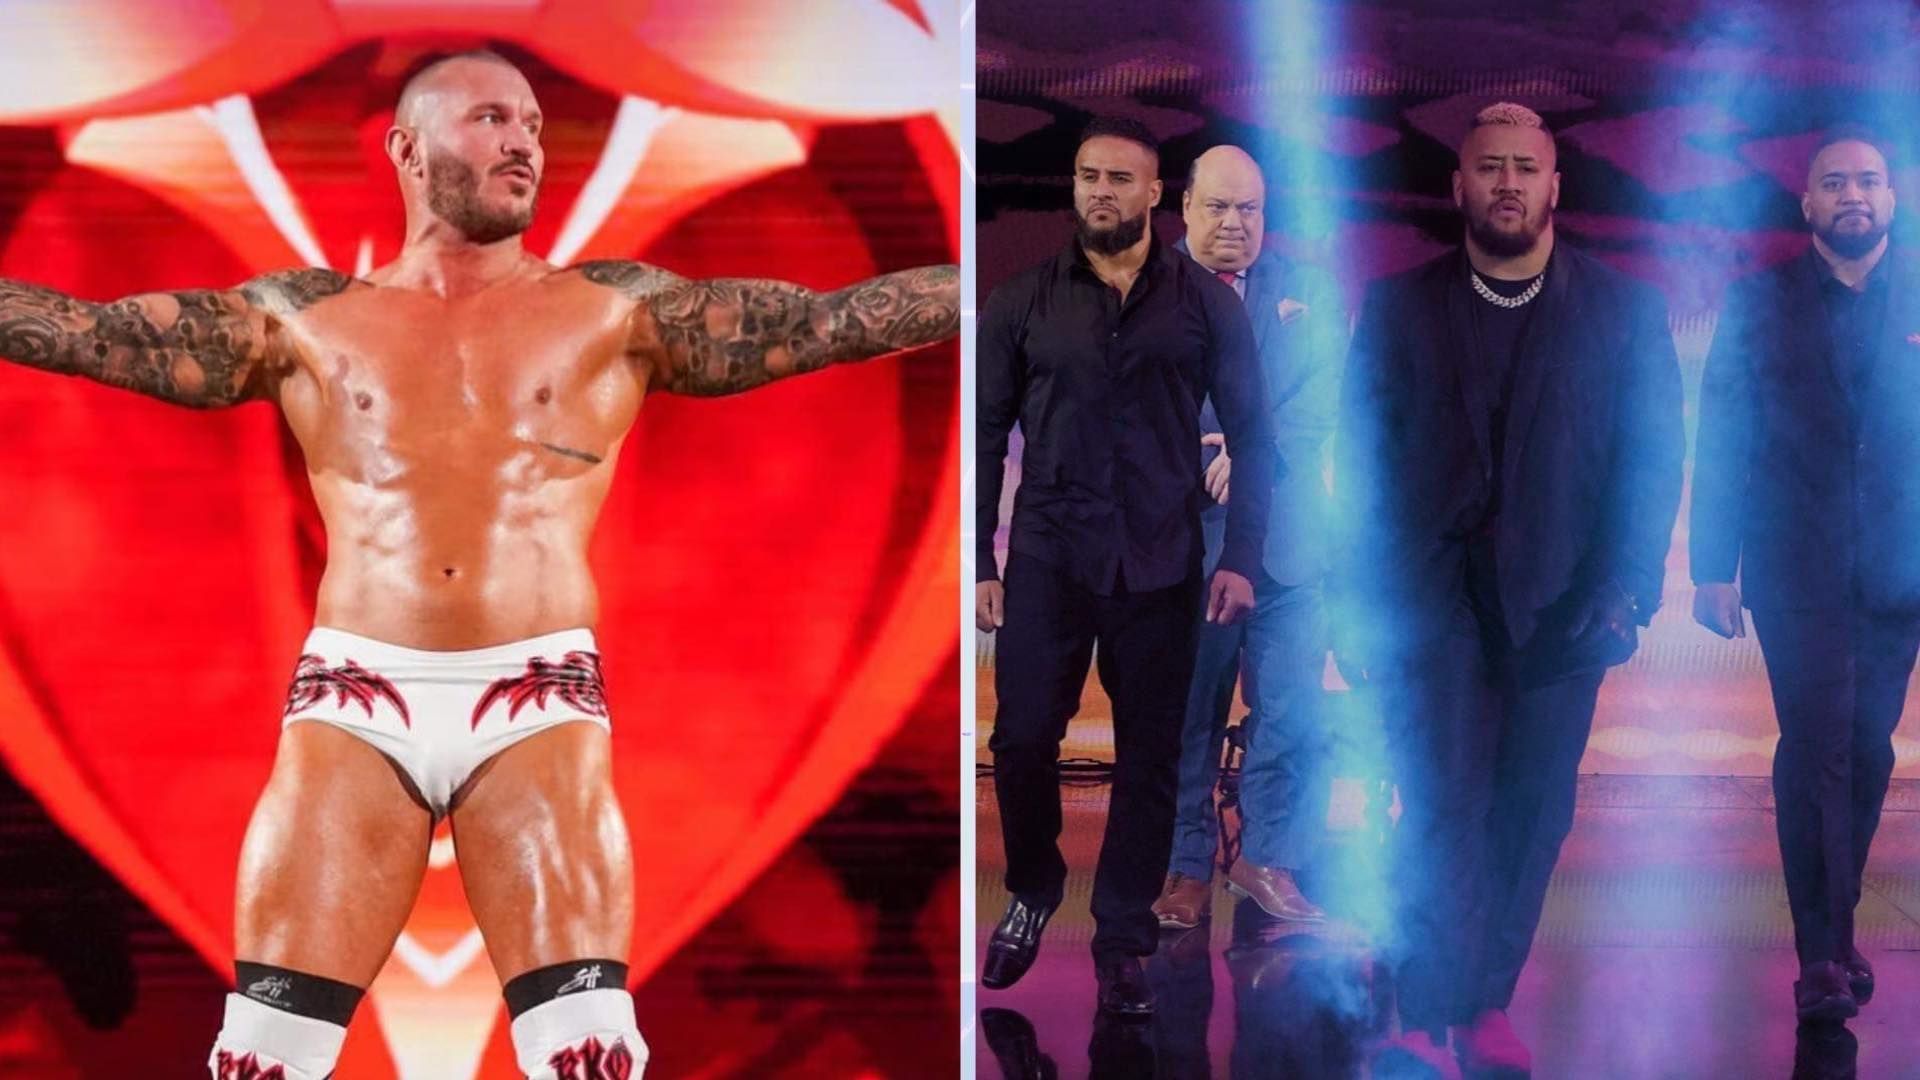 Four full-length shows are coming to WWE Network &amp; Peacock [Credit: WWE.com]